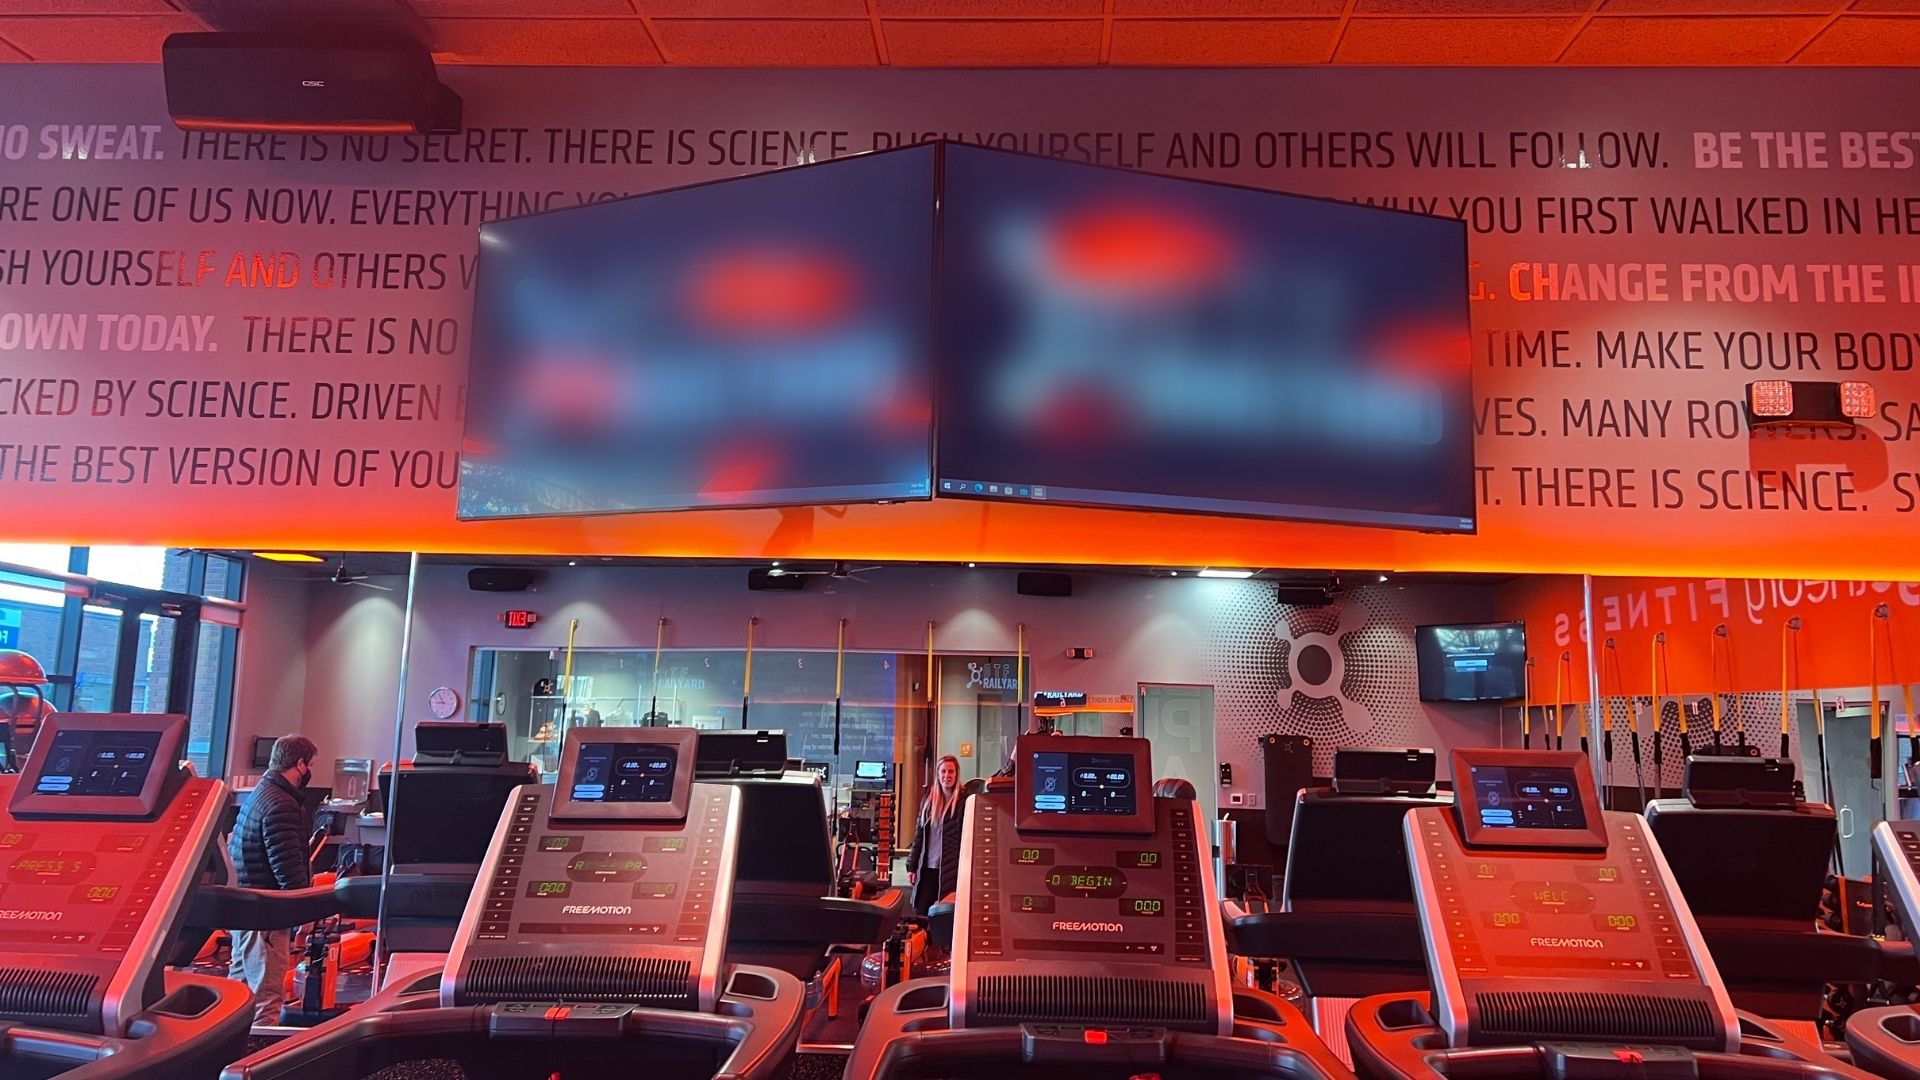 Small-scale screens in fitness center replaced.